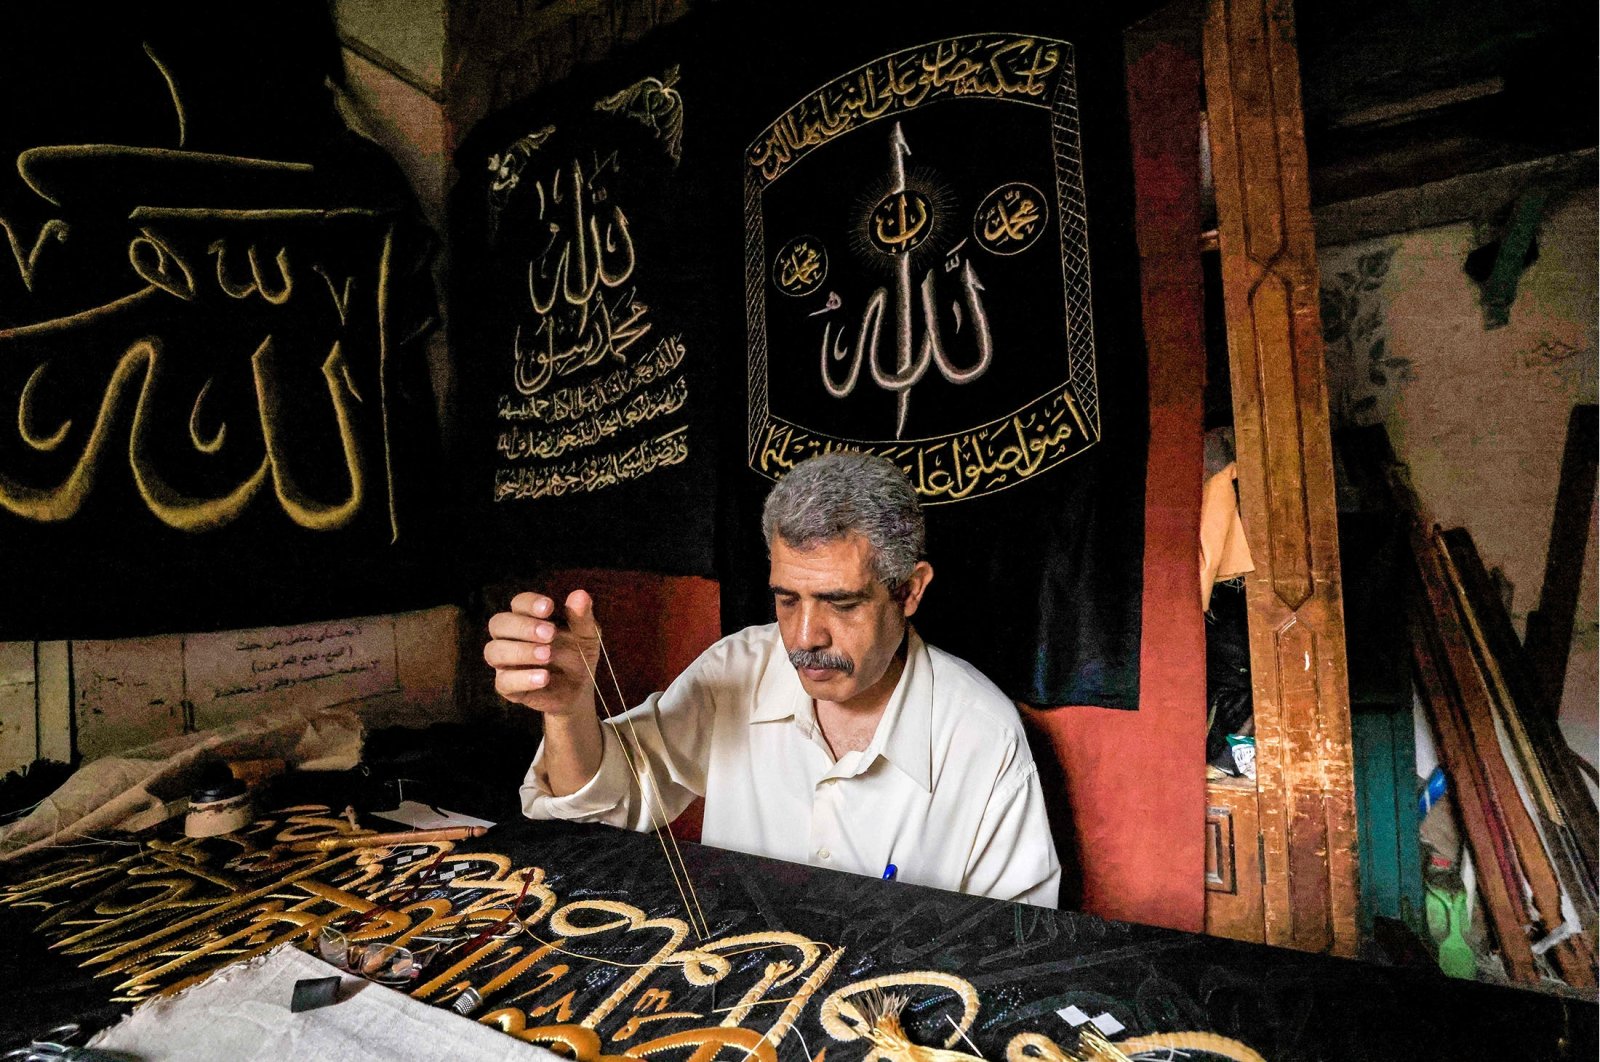 Egyptian embroiderer Ahmed Othman el-Kassabgy sews with gold thread a verse from the Quran onto a replica drape to be sold as a souvenir for tourists visiting Cairo, Egypt, June 15, 2022. (AFP Photo)